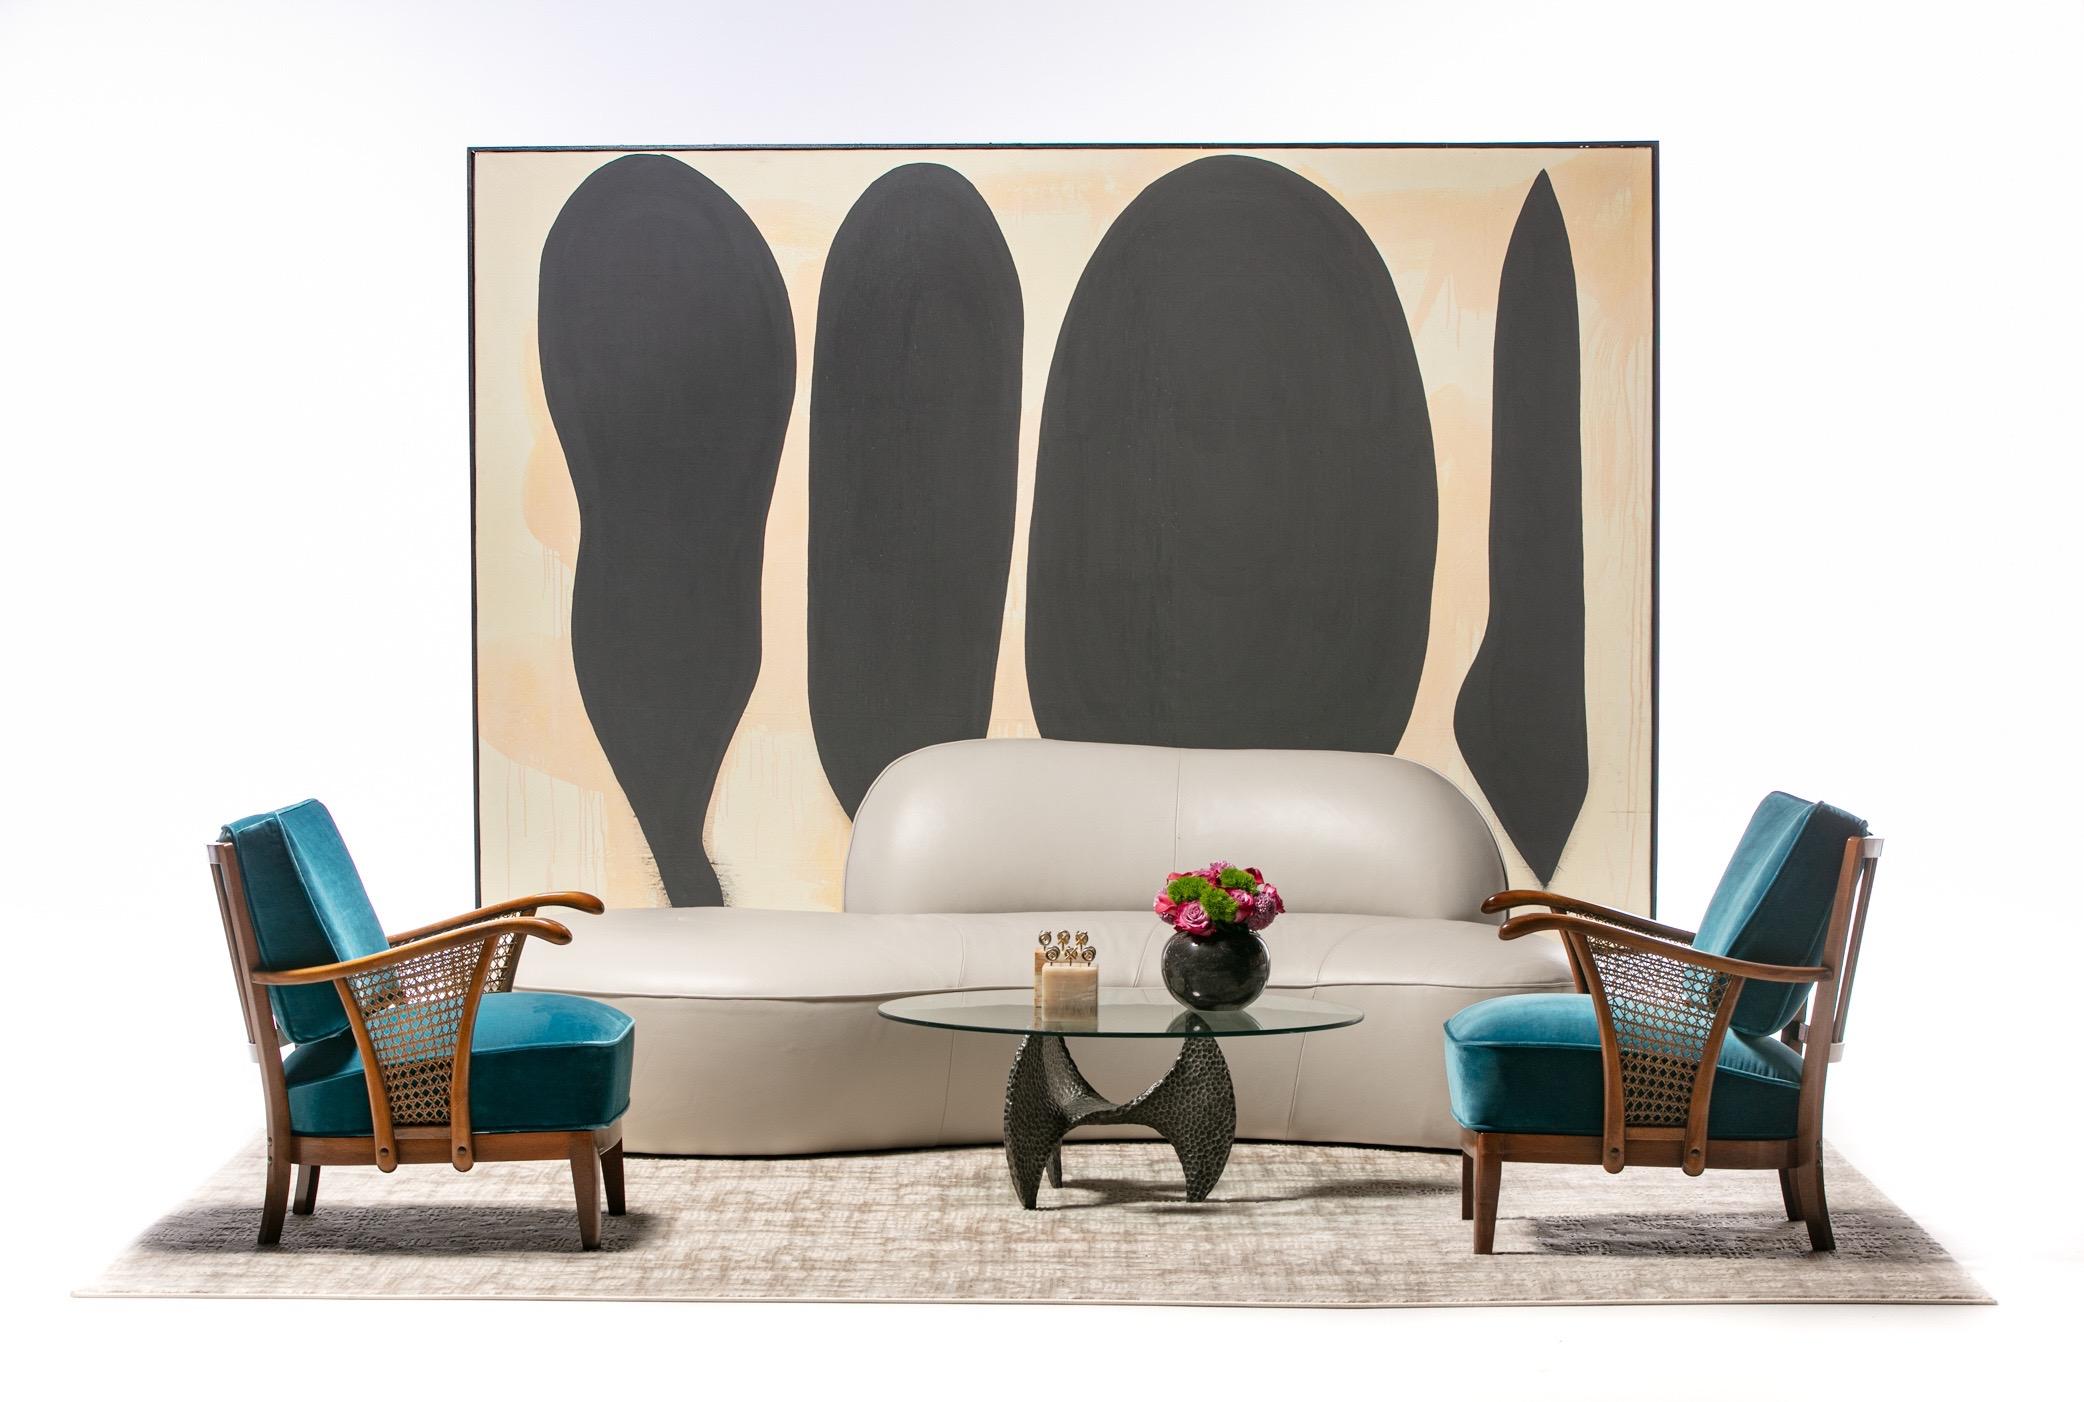 Pair of sculptural 1940s Scandinavian lounge chairs with cushions reupholstered in Lee Jofa blue velvet and cane panel arms. Attributed to Soren Hansen for Fritz Hansen. A luxe juxtaposition of materials with the velvet, cane and wood frames. Quite